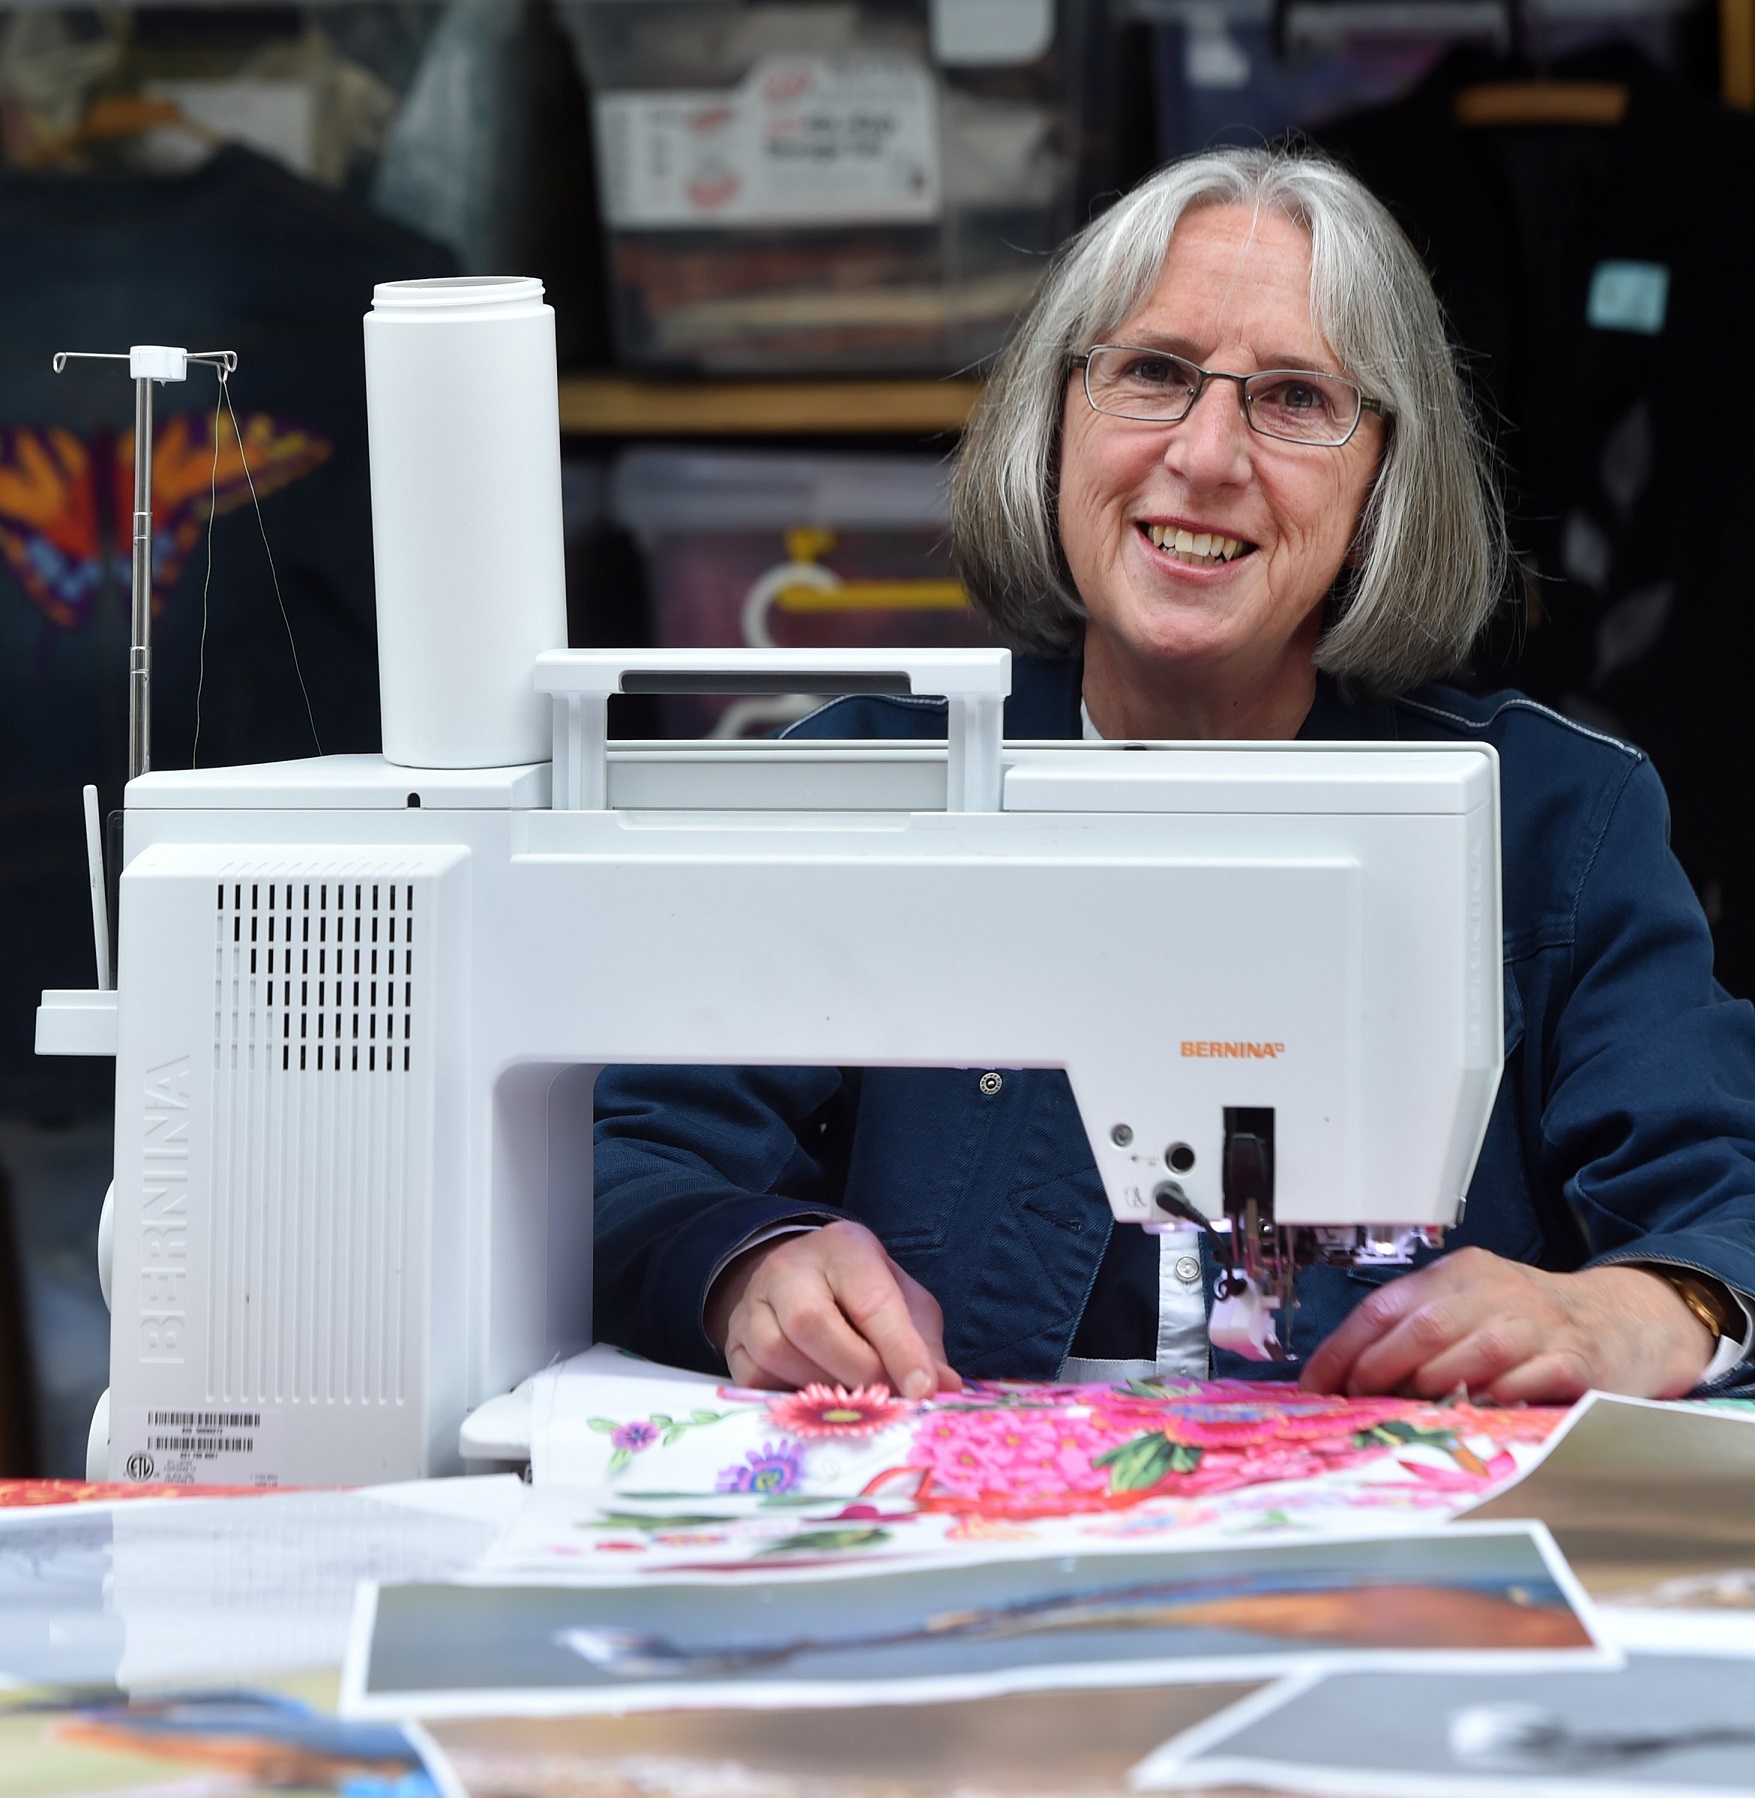 Mary Jane Sneyd uses basic stitches on her sewing machine to create her works.